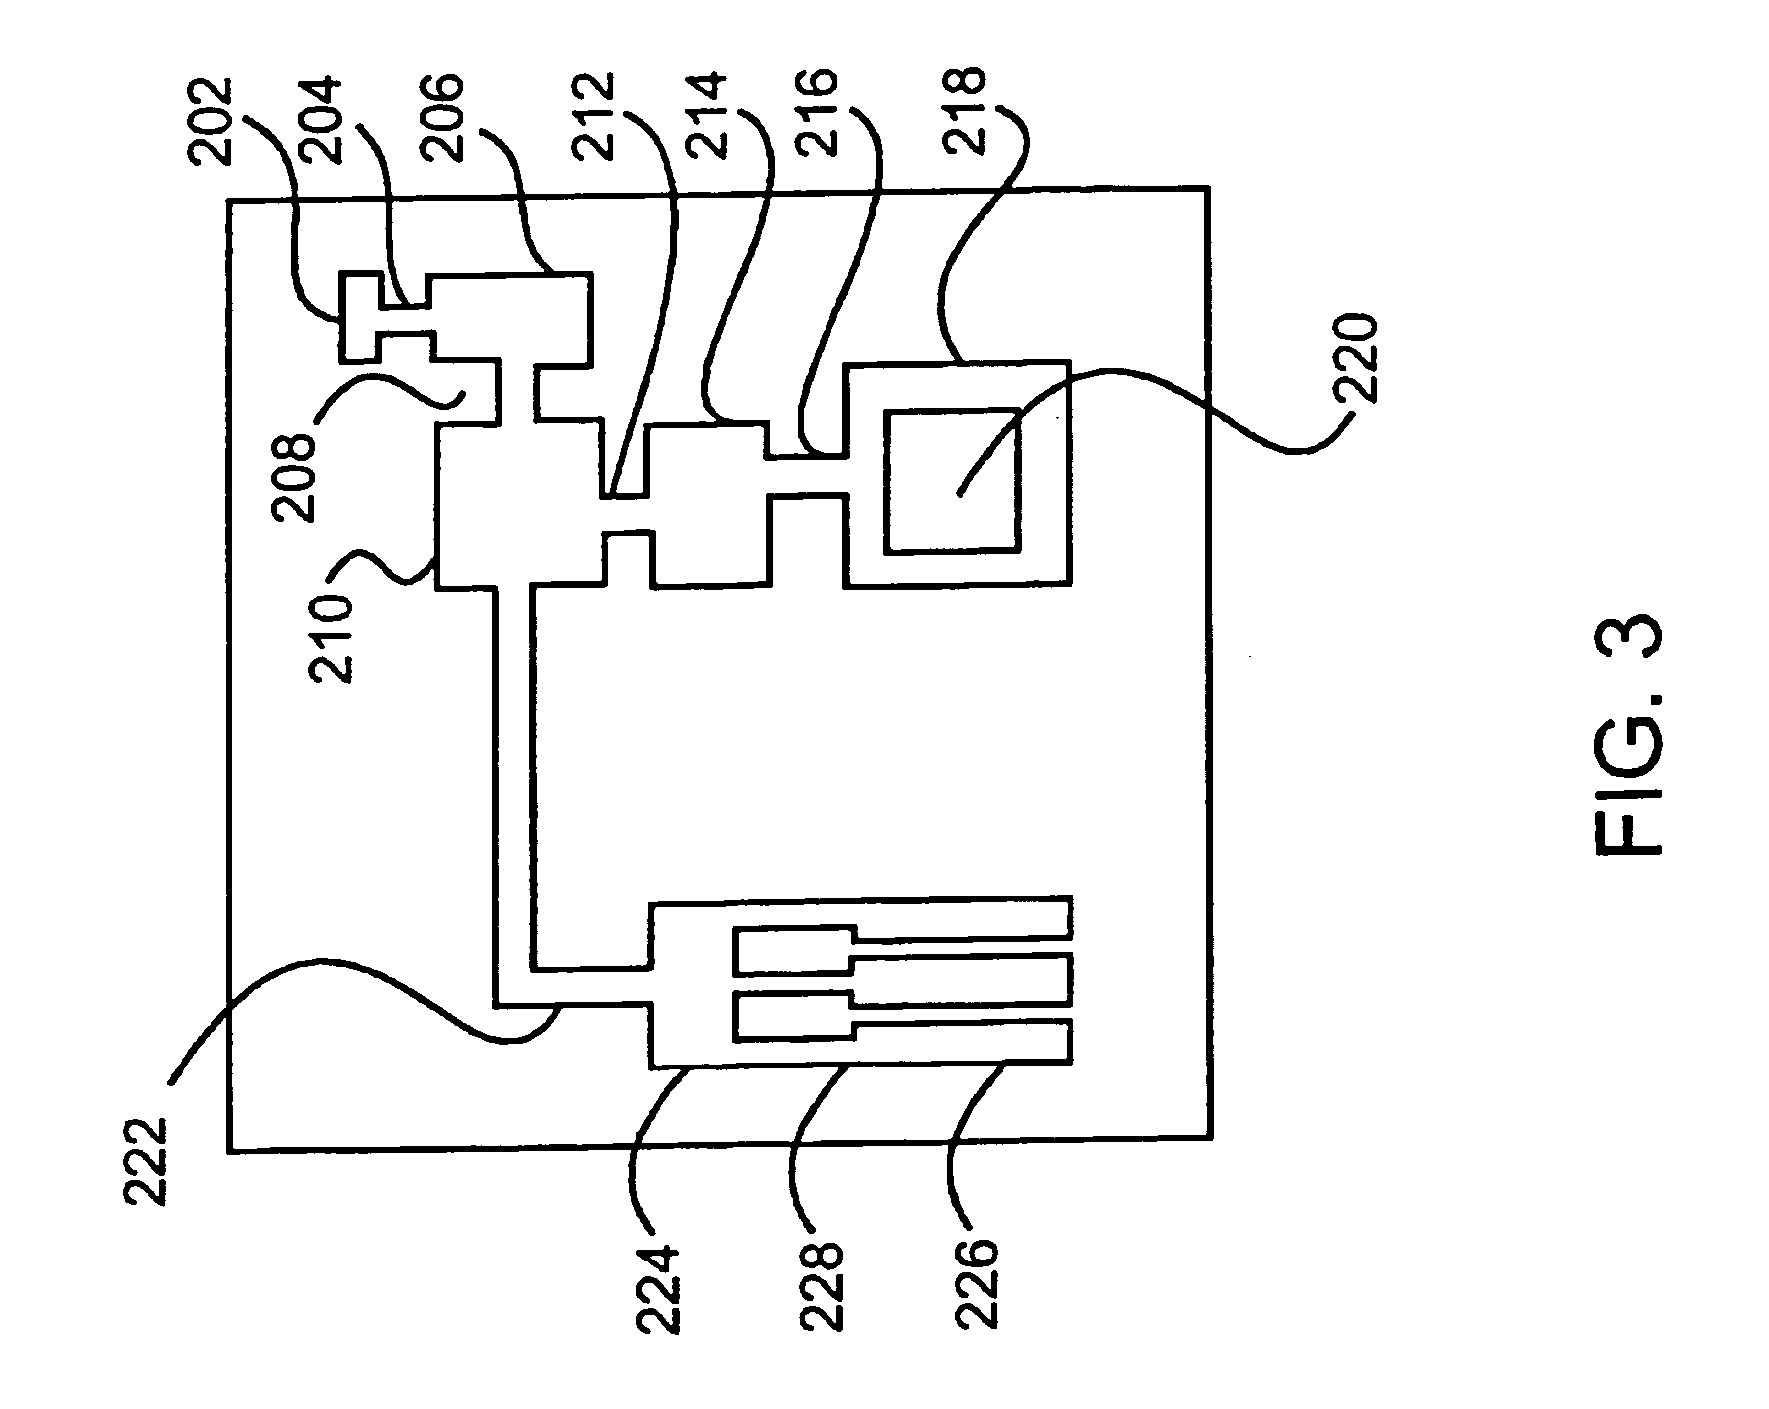 Miniaturized genetic analysis systems and methods